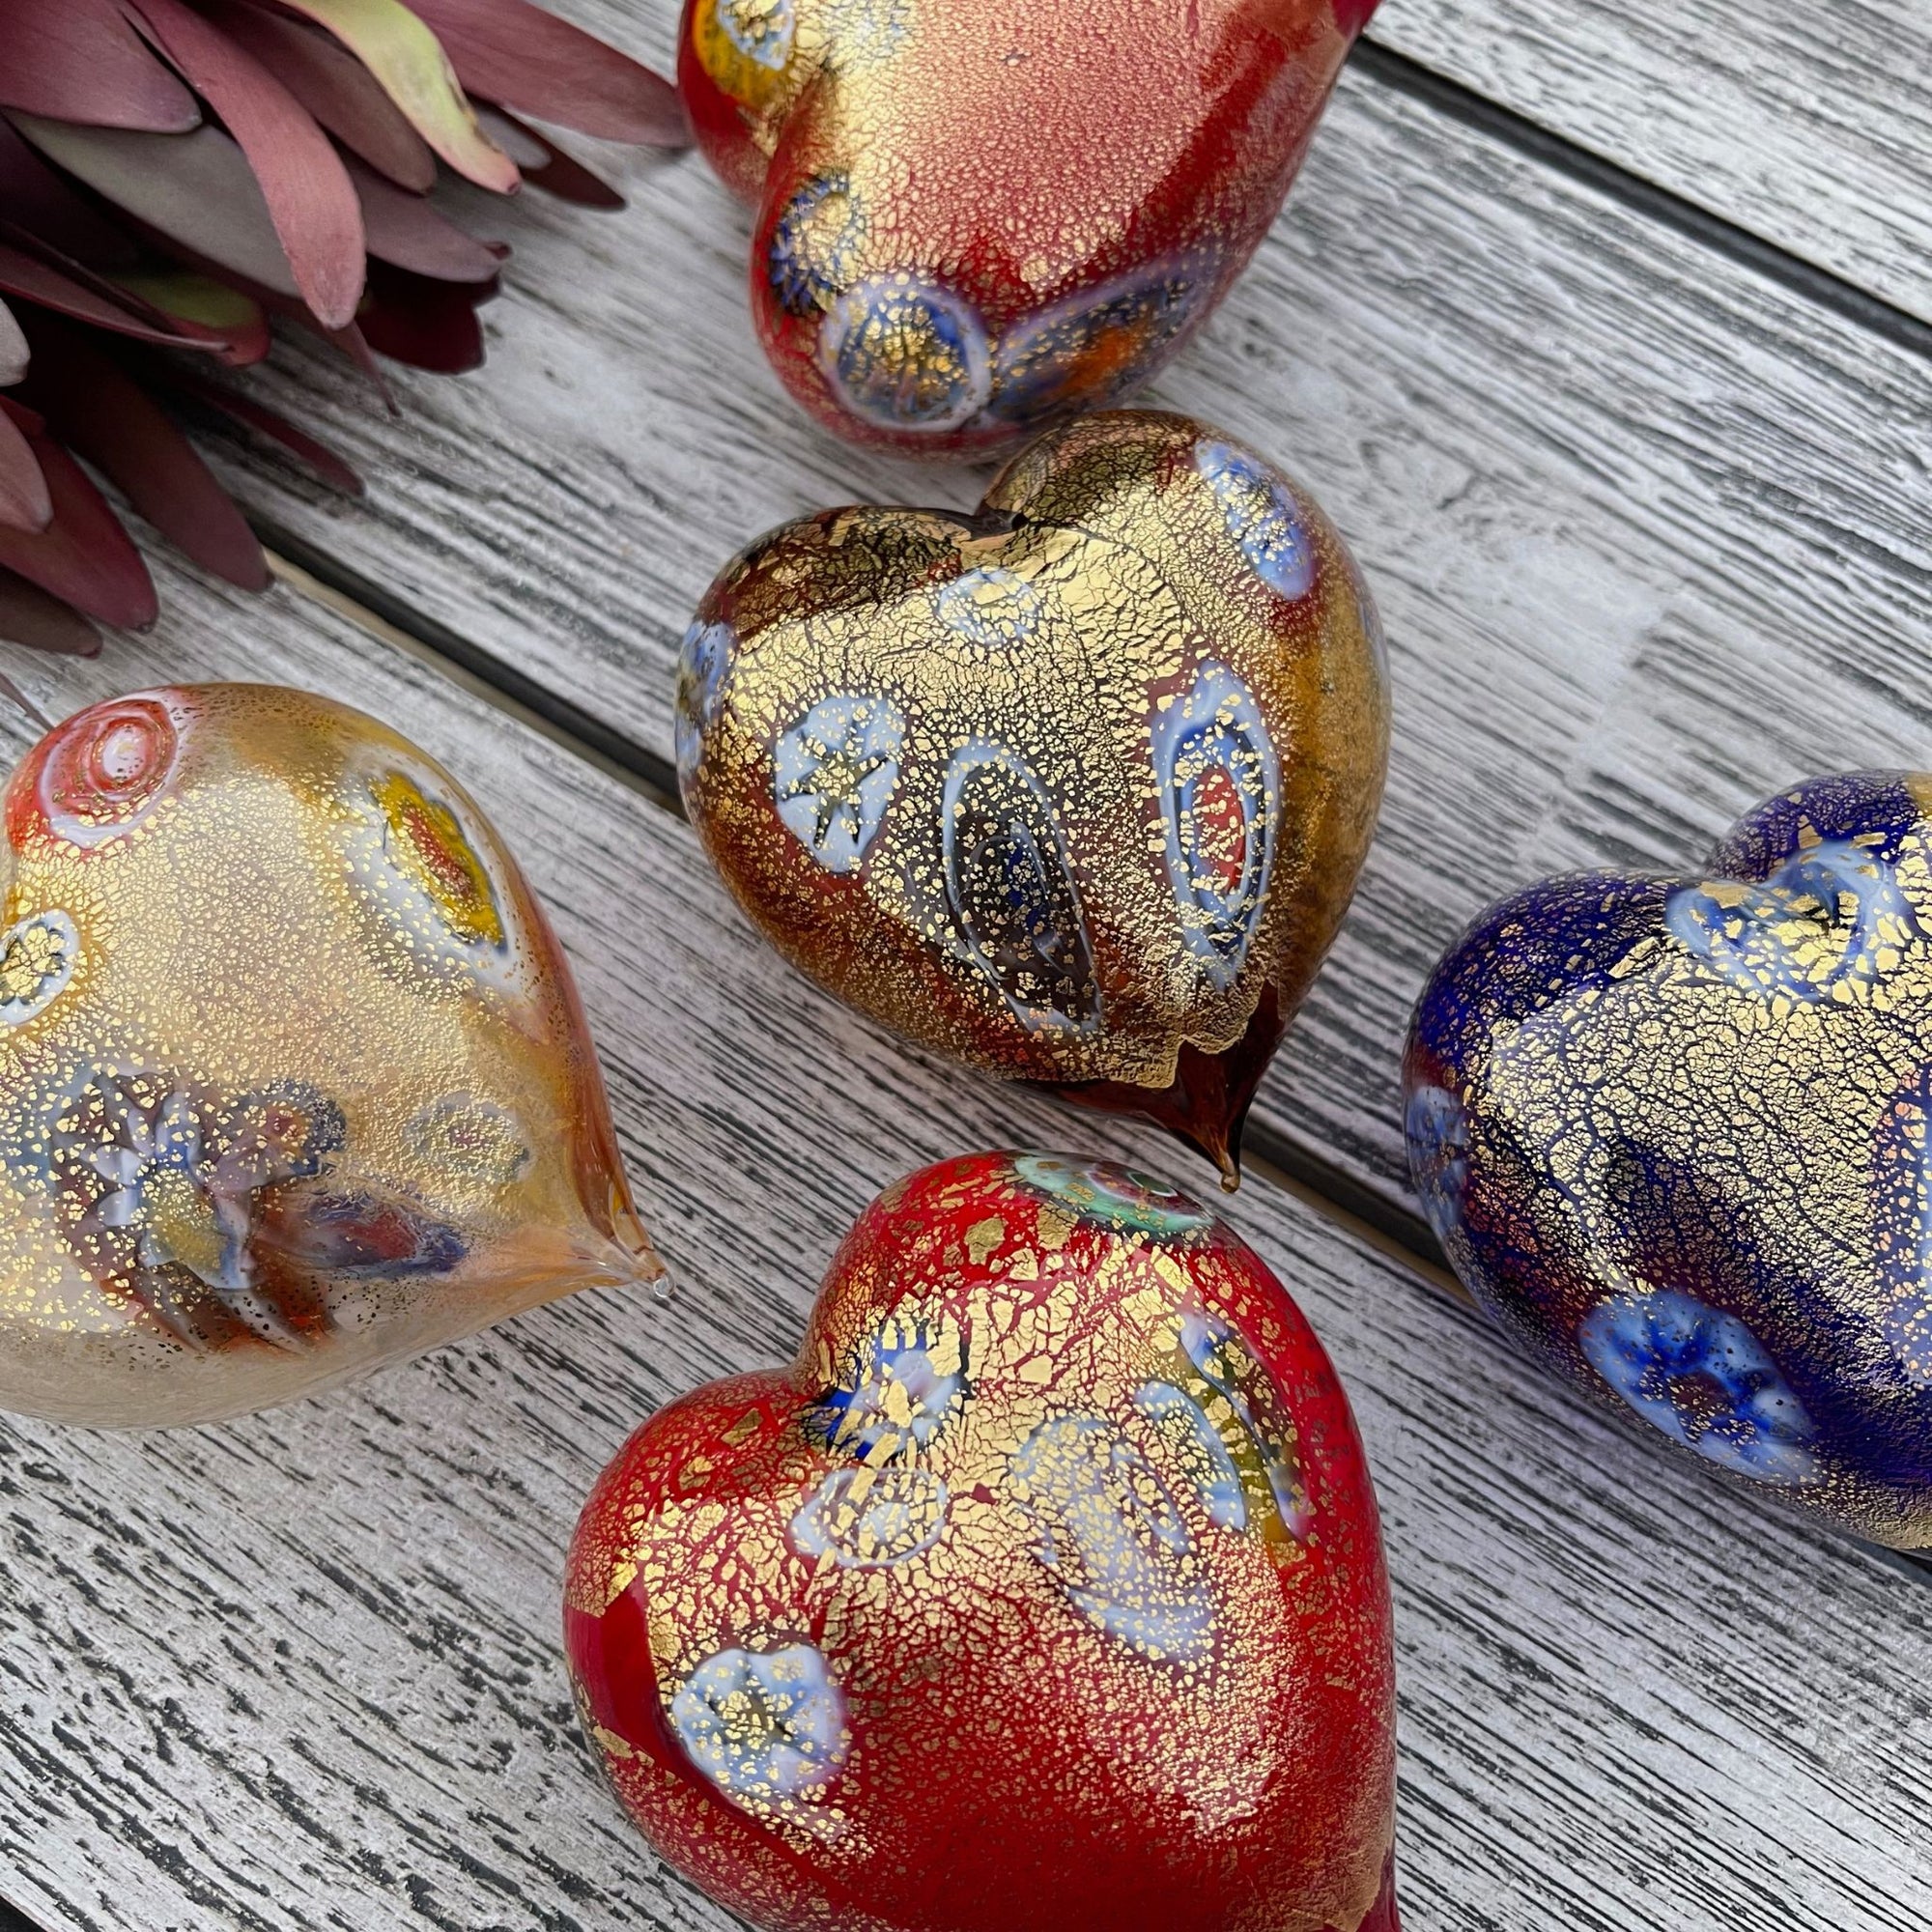 Small Hand Blown Glass Hearts